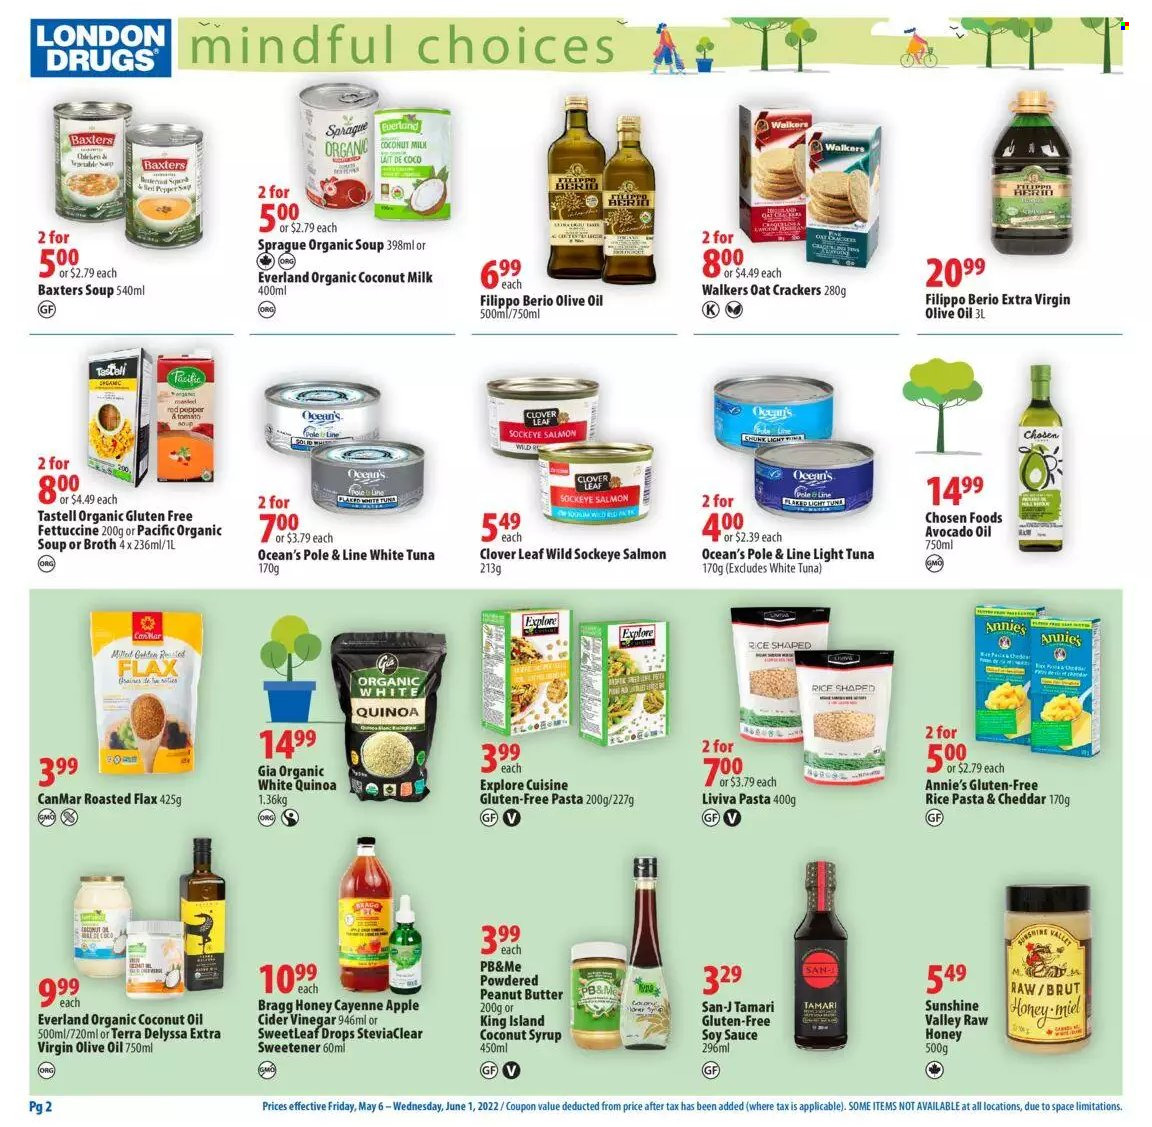 thumbnail - London Drugs Flyer - May 06, 2022 - June 01, 2022 - Sales products - crackers, Annie's, oats, broth, sweetener, coconut milk, salmon, tuna, soup, light tuna, sauce, rice, pasta, soy sauce, apple cider vinegar, avocado oil, coconut oil, extra virgin olive oil, vinegar, olive oil, oil, honey, peanut butter, syrup, Clover, Brut, quinoa. Page 2.